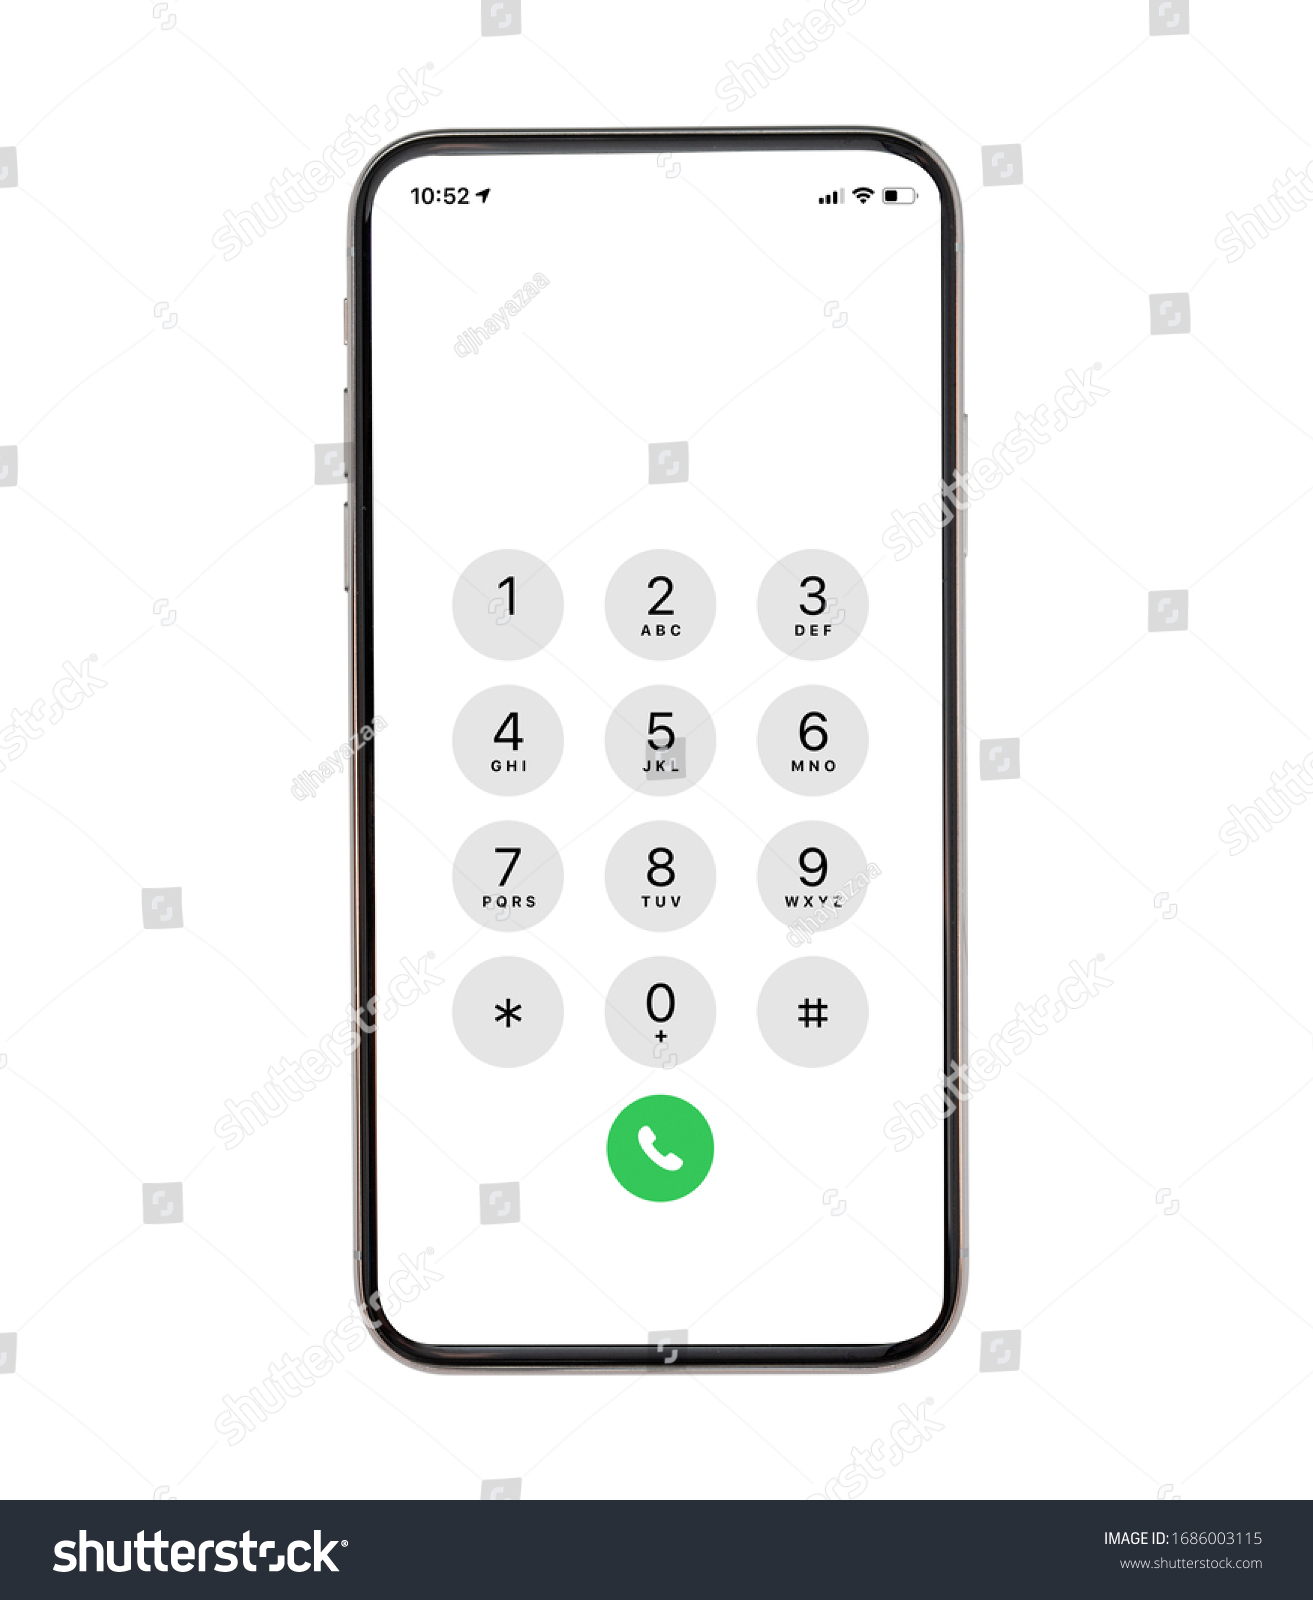 Display Keypad with numberst for mobile phone.Keypad for template in touchscreen device. mockup phone Isolated on white background #1686003115